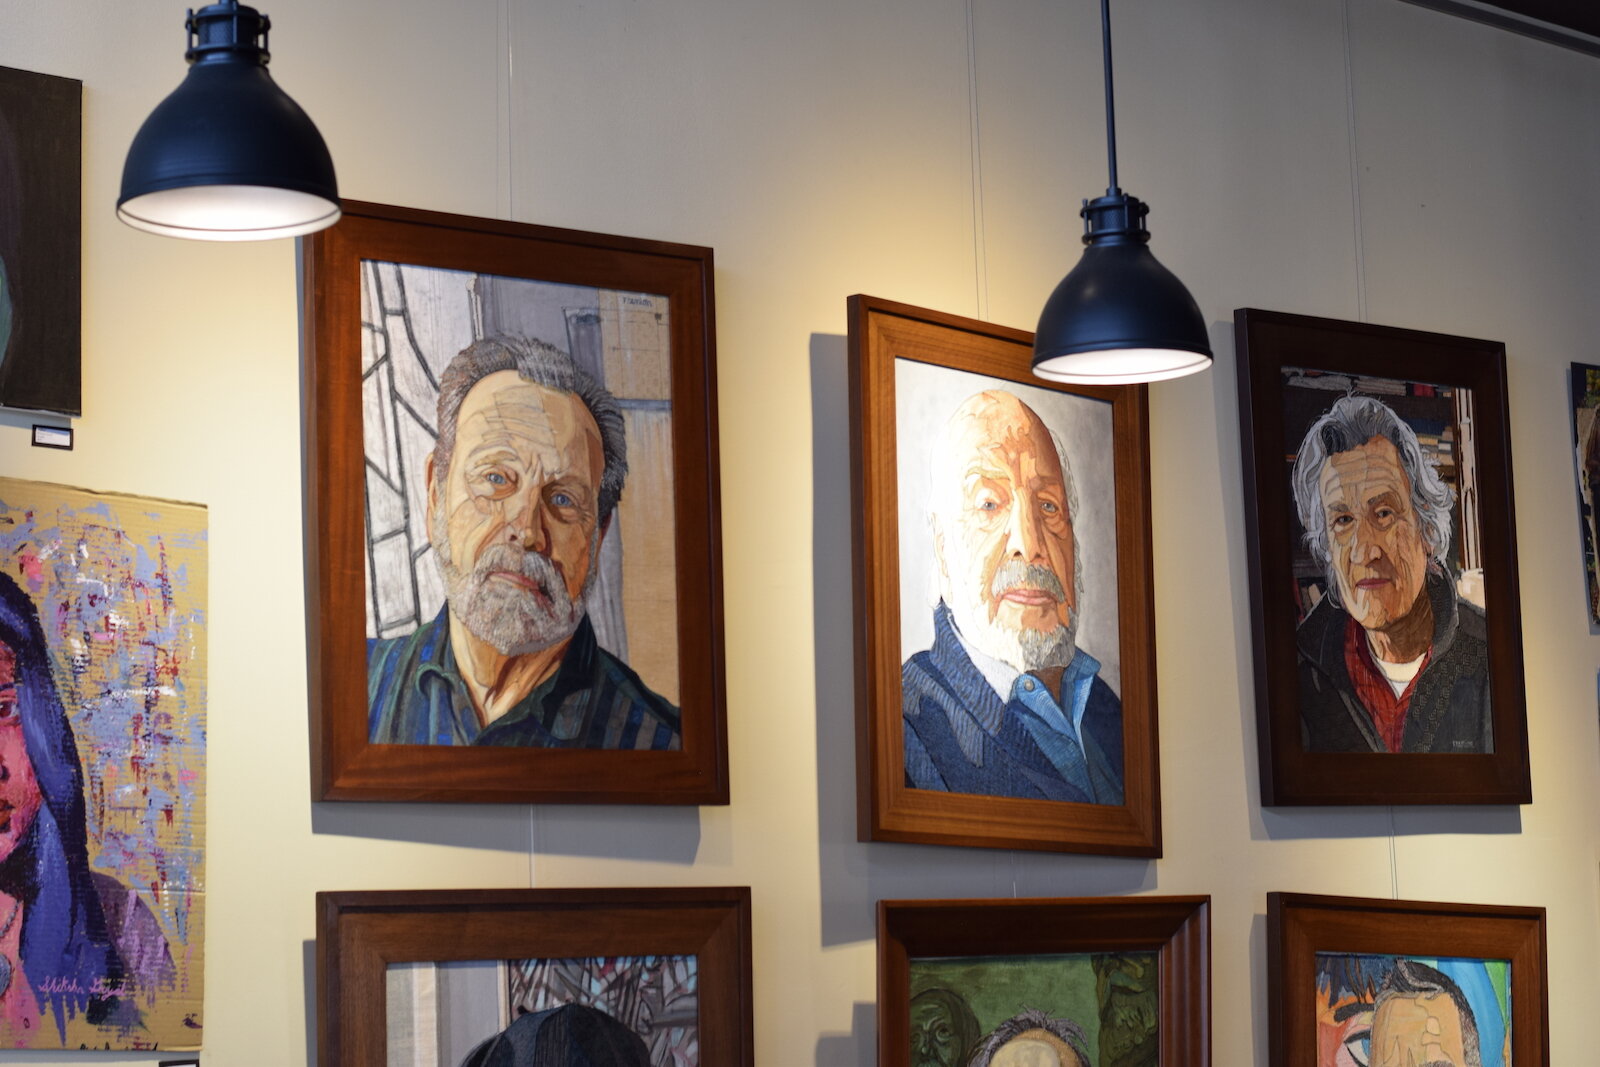 Davey's Delicious Bagels displays the work of local artists, including high school students.